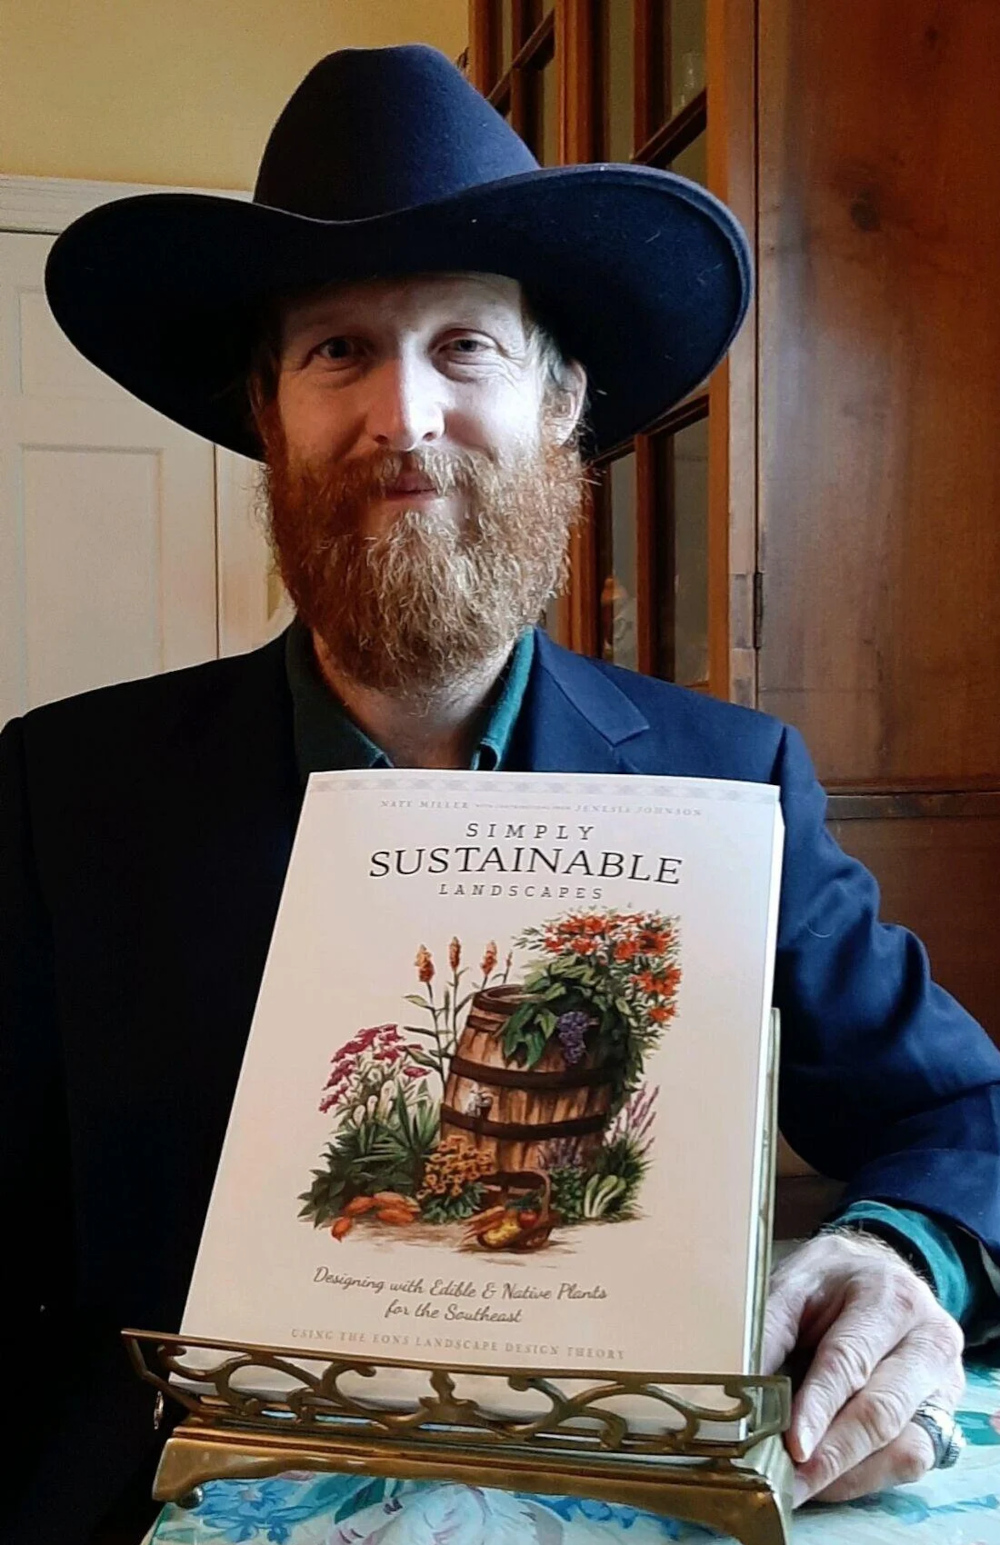 Nate Miller, co-author of Simply Sustainable Landscapes